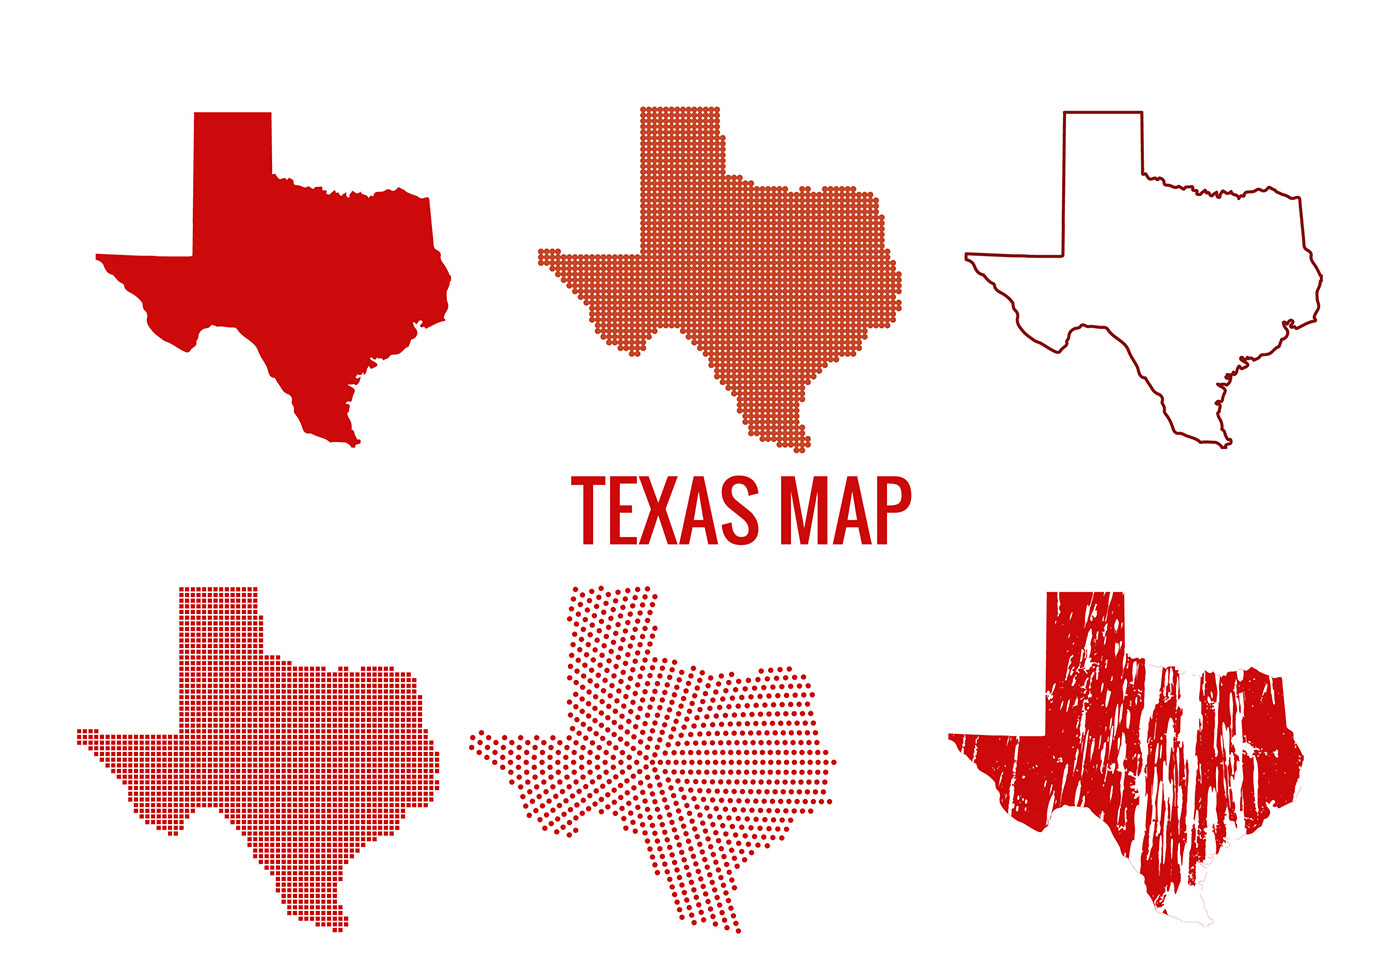 Texas Outline Vector At Collection Of Texas Outline Vector Free For Personal Use 3094